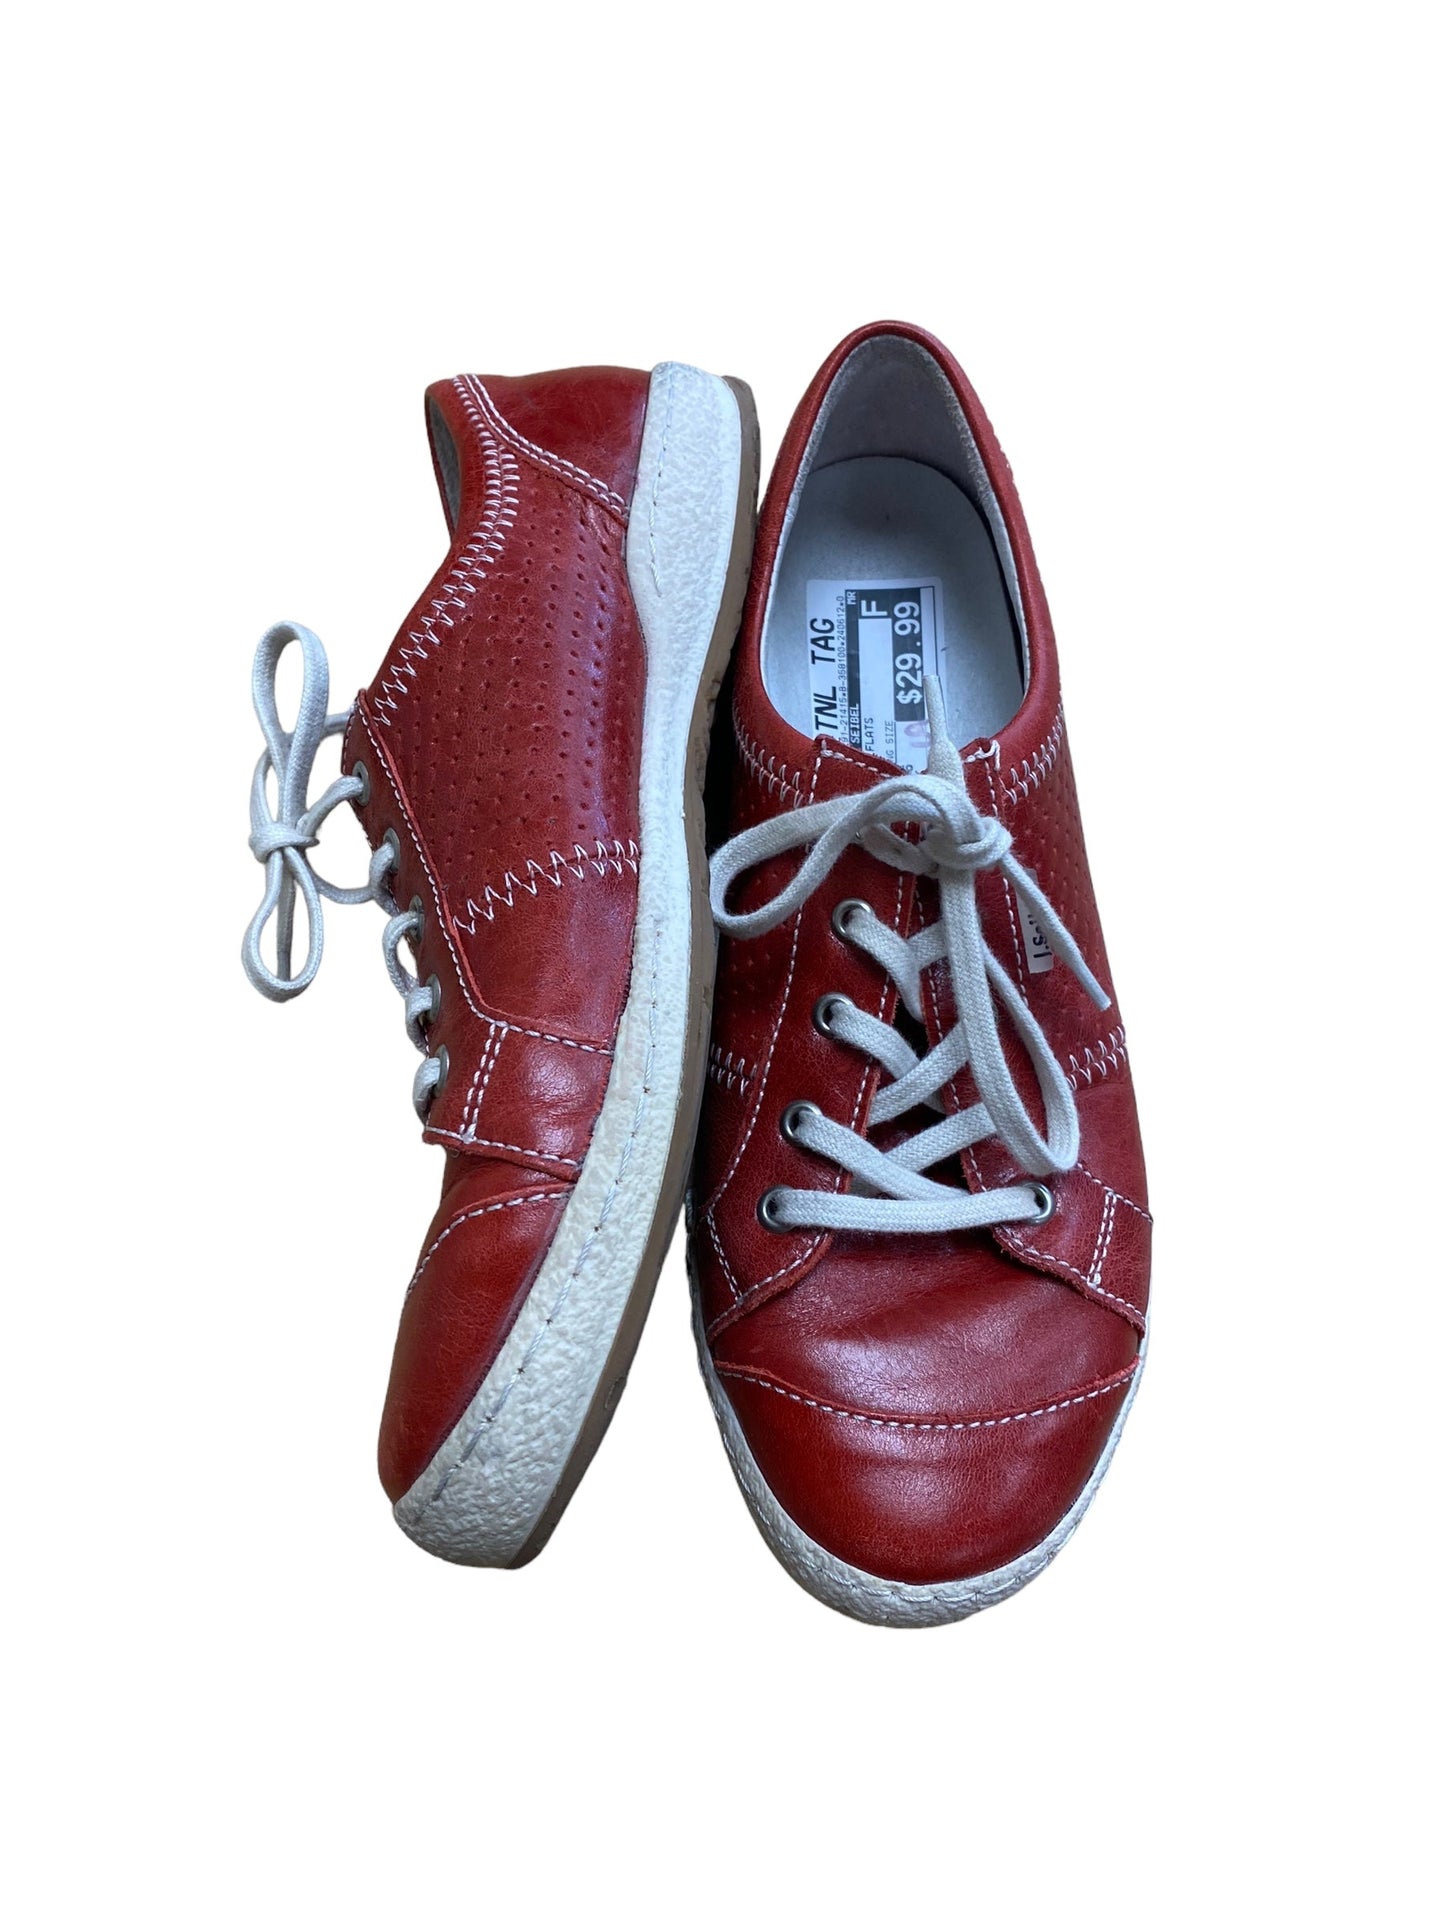 Red Shoes Flats Josef Seibel, Size 6